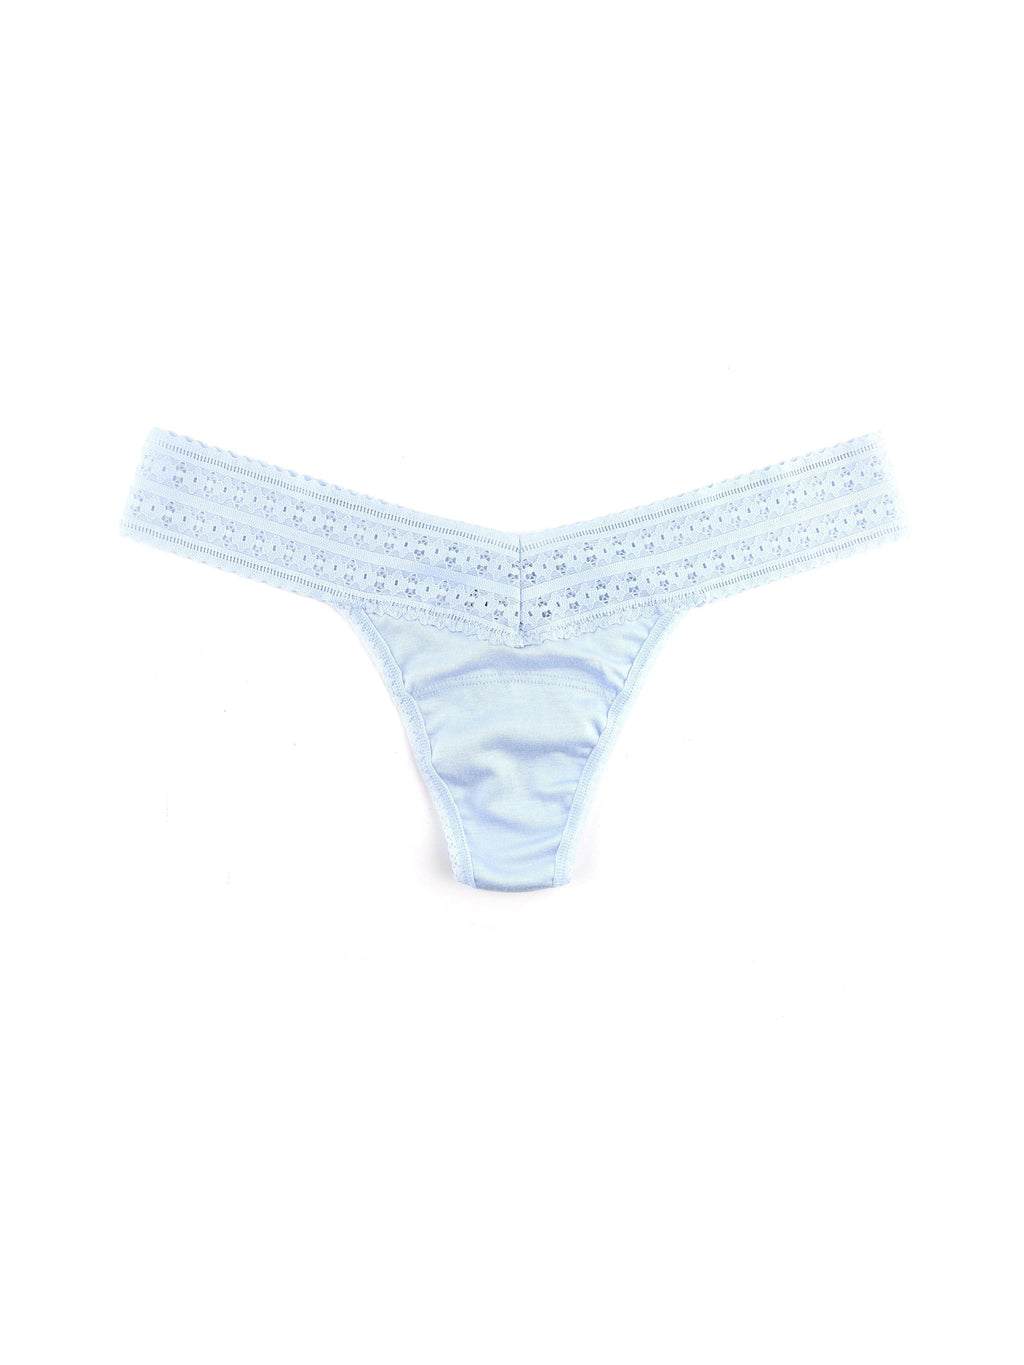 DreamEase™ Low Rise Thong Serenity Blue | Hanky Panky